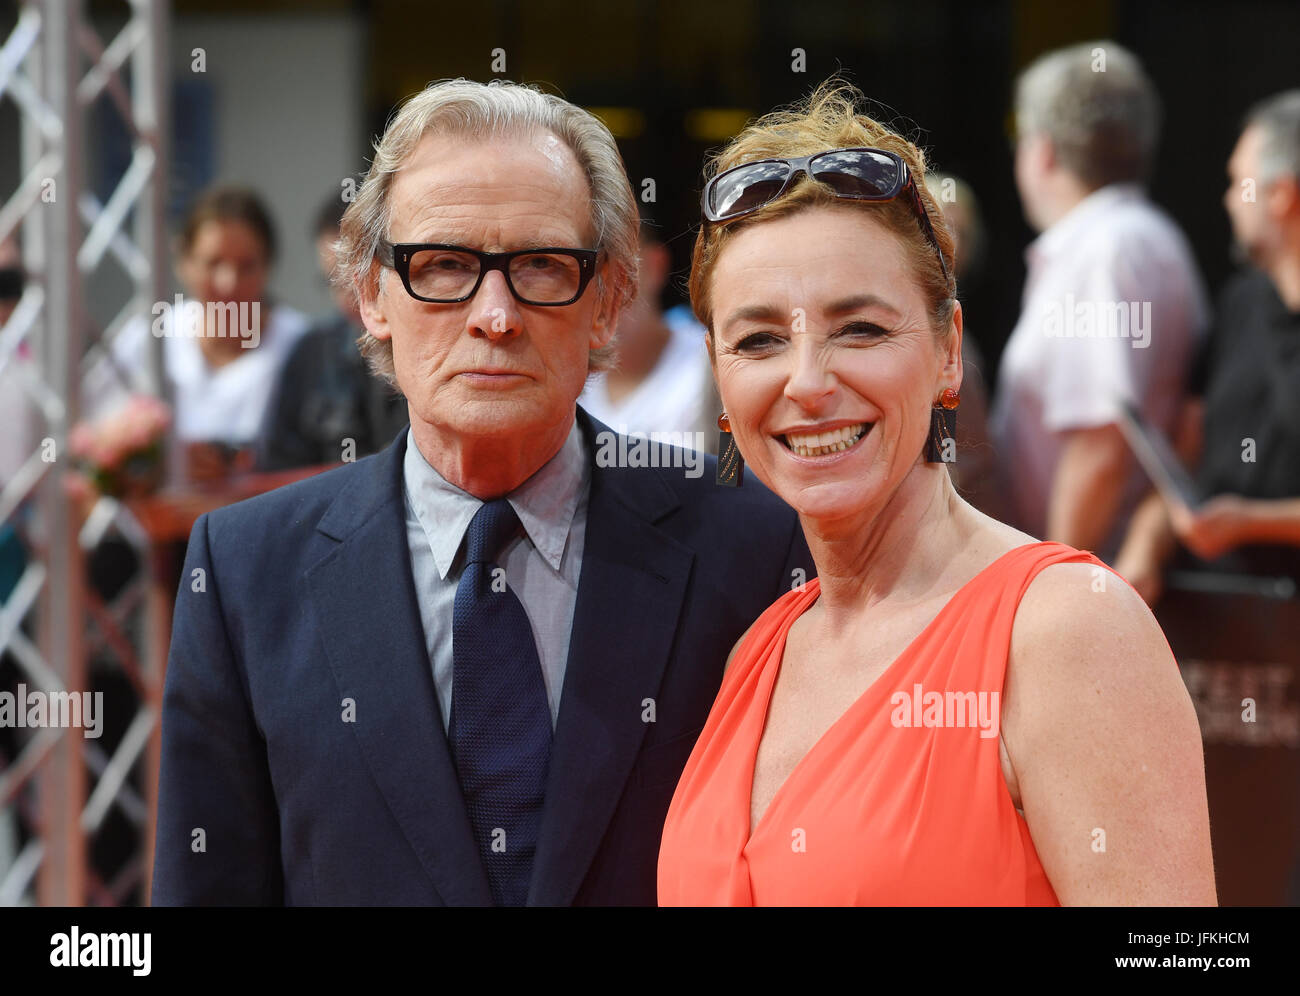 Munich, Germany. 1st July, 2017. The actor Bill Nighy and the director of the film festival, Diana Iljine (R) arrive for the award ceremony and the German premiere of the closing film 'Their Finest' during the Munich Film Festival in Munich, Germany, 1 July 2017. Photo: Tobias Hase/dpa/Alamy Live News Stock Photo